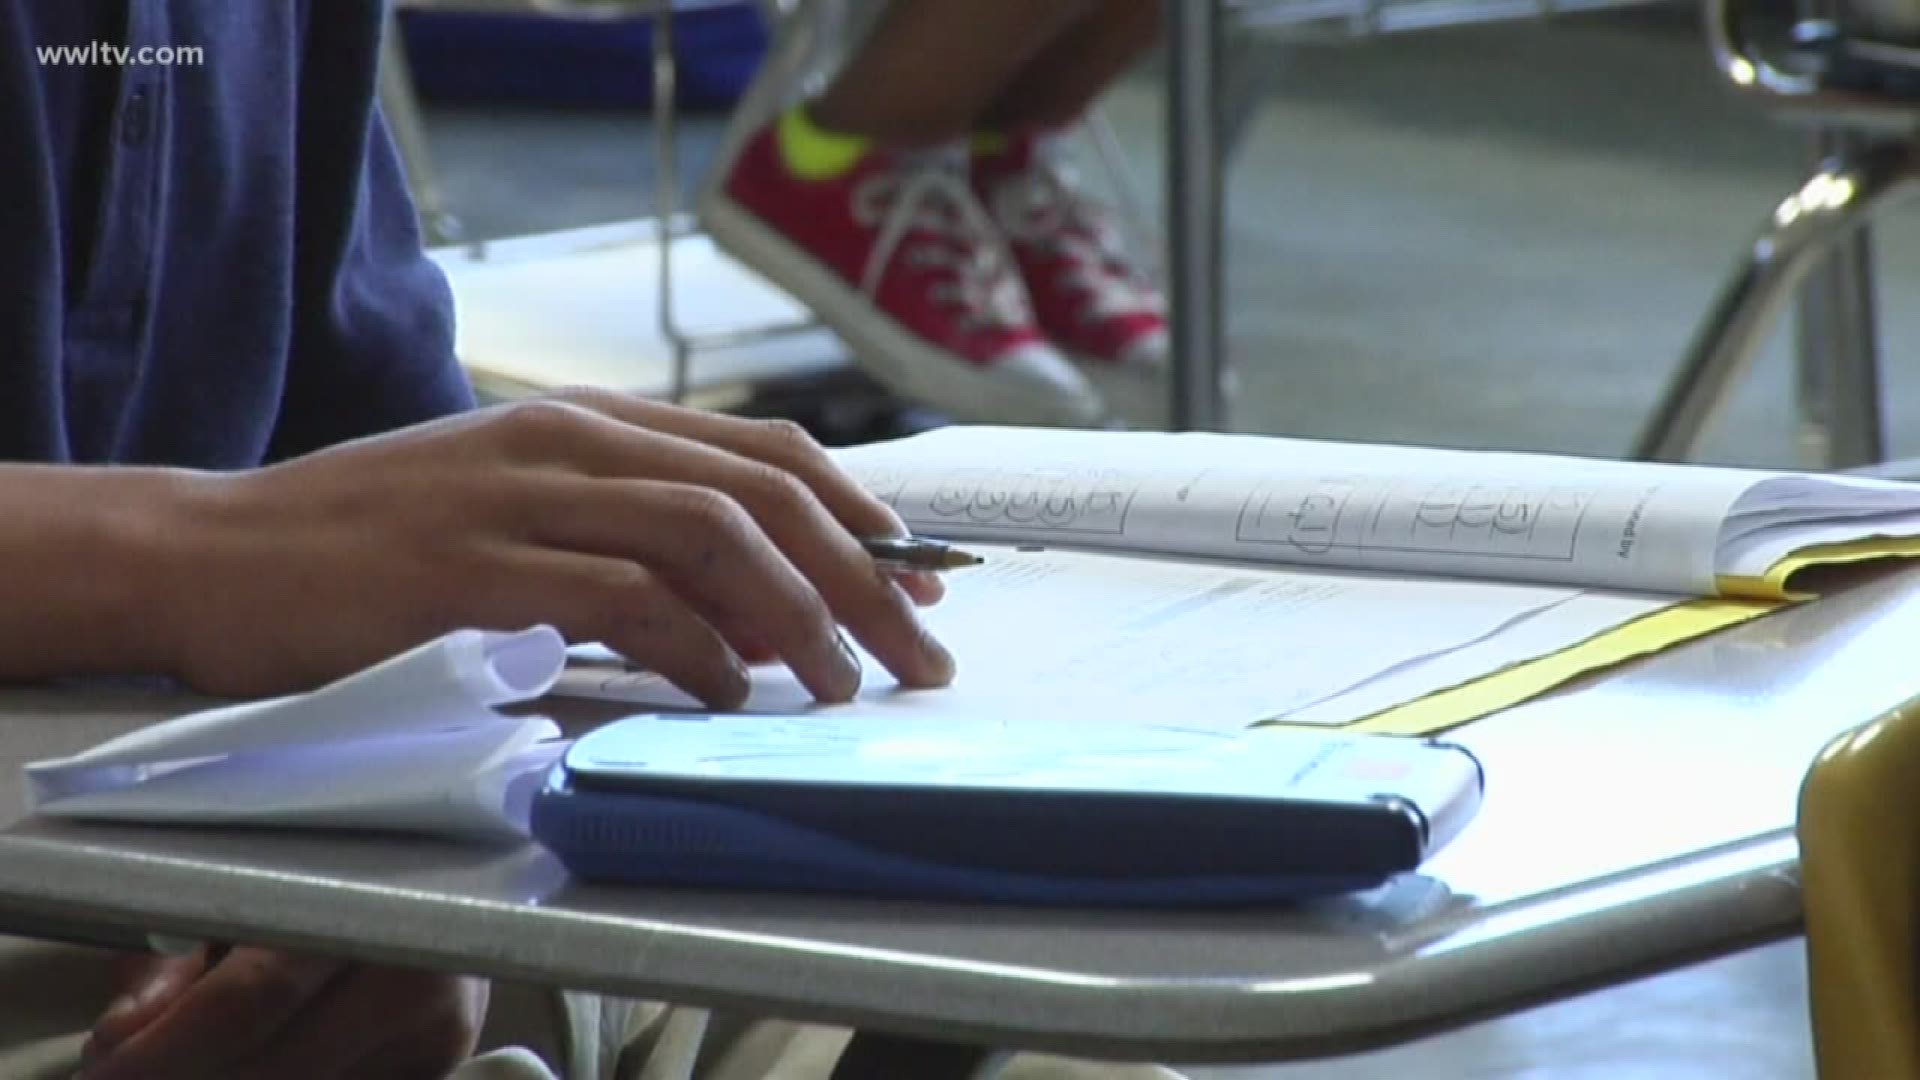 Parents aired their frustration Thursday night against New Orleans charter schools and public schools.